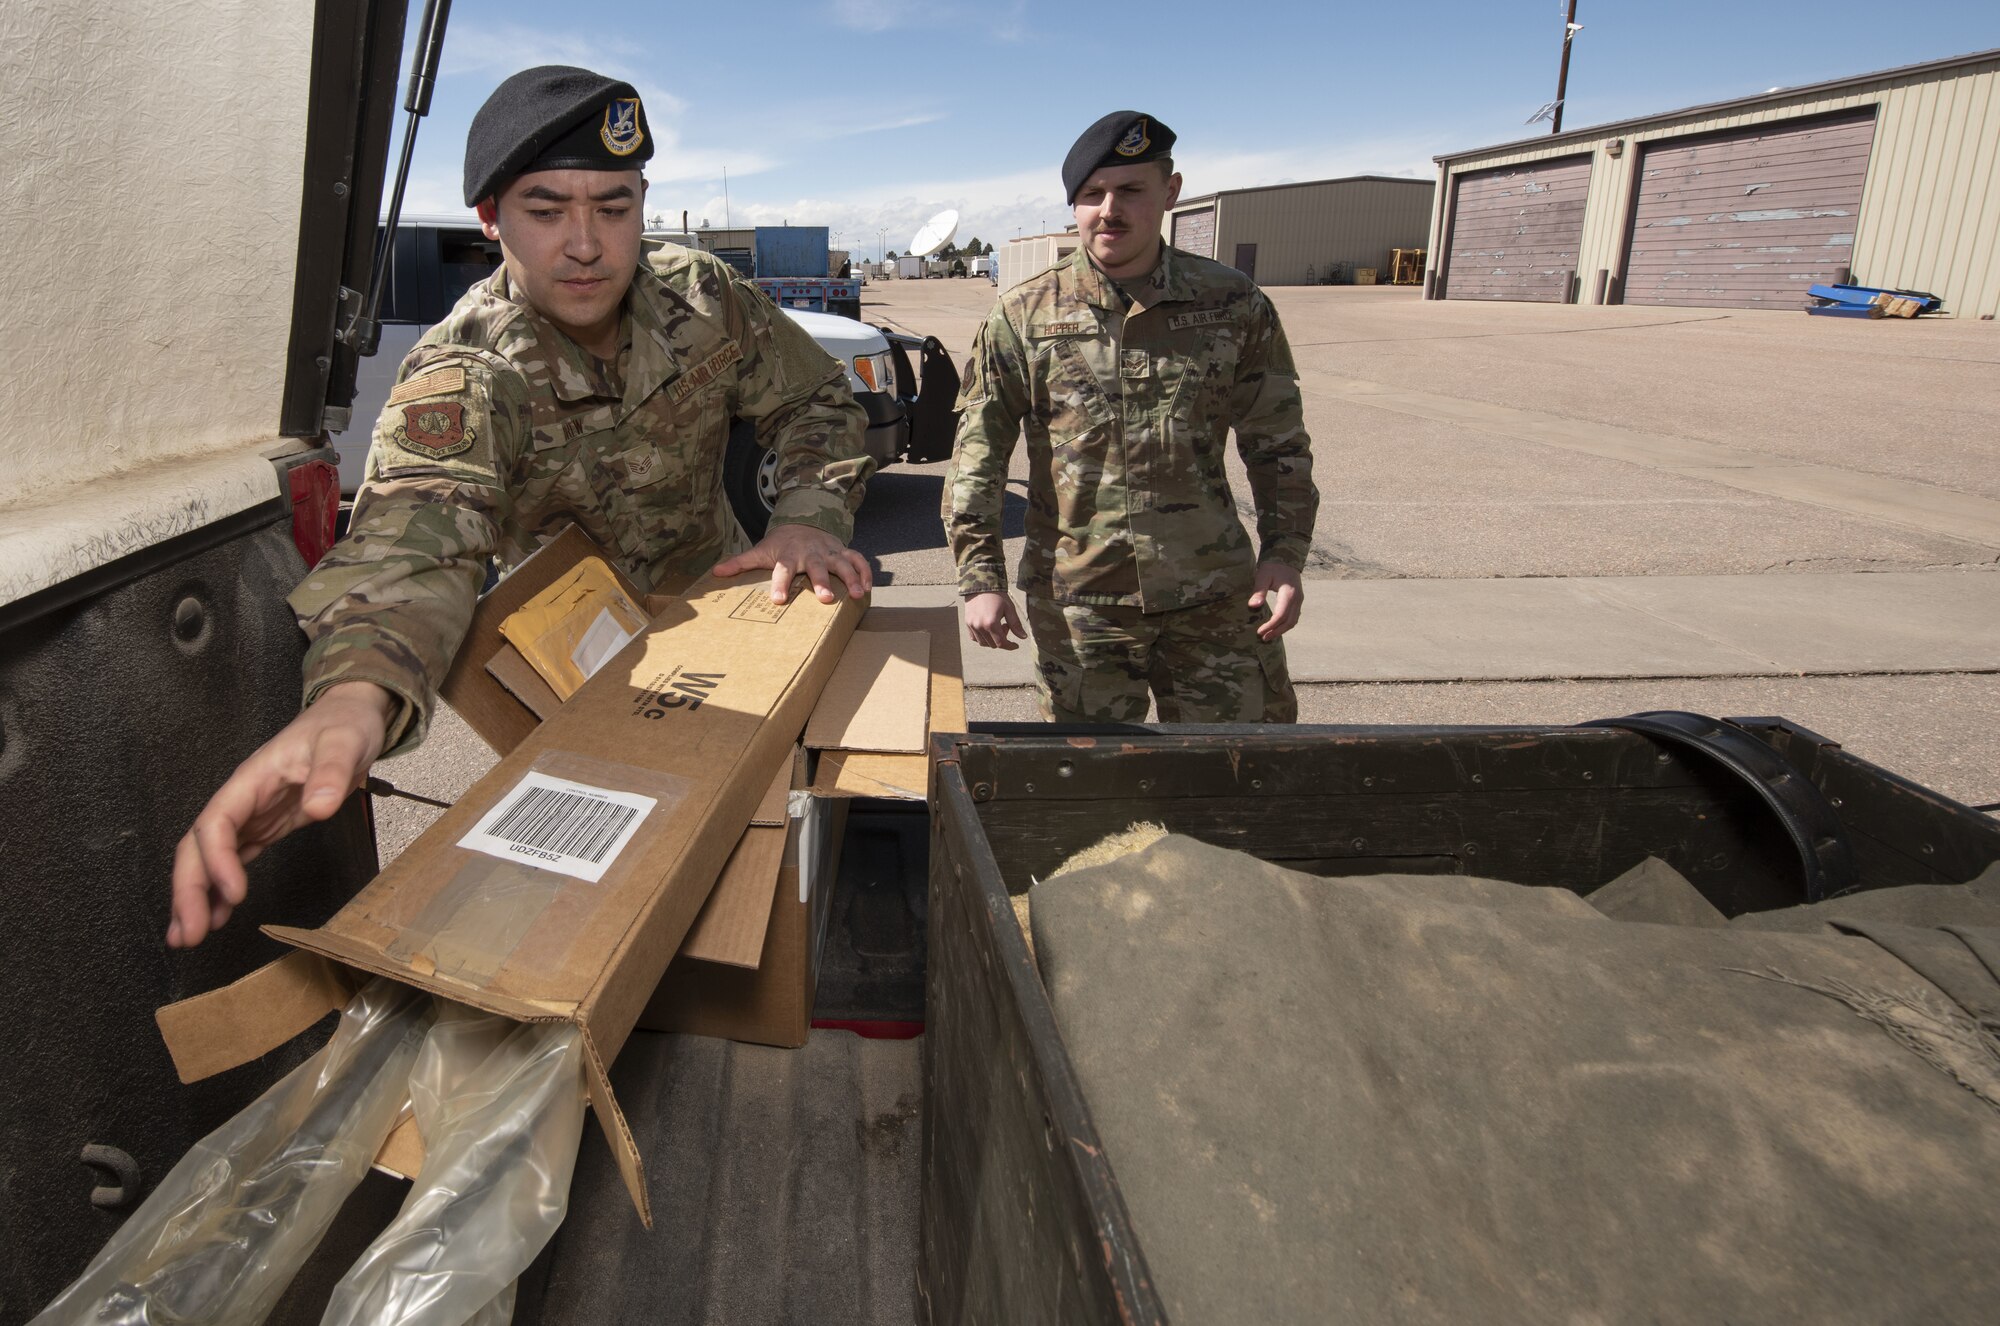 Staff Sgt. Garrett Brew, 50th Security Forces Squadron combat arms instructor, loads a shipment of rifle barrels into a truck as Senior Airman Austin Hopper, 50th Security Force Squadron resource and logistics, looks on at the 50th Security Forces logistics facility at Schriever Air Force Base, Colorado, March 11, 2019. The logistics flight is responsible for acquiring the equipment defenders need for carrying out their mission every day. (U.S. Air Force Photo by Staff Sgt. Matthew Coleman-Foster)